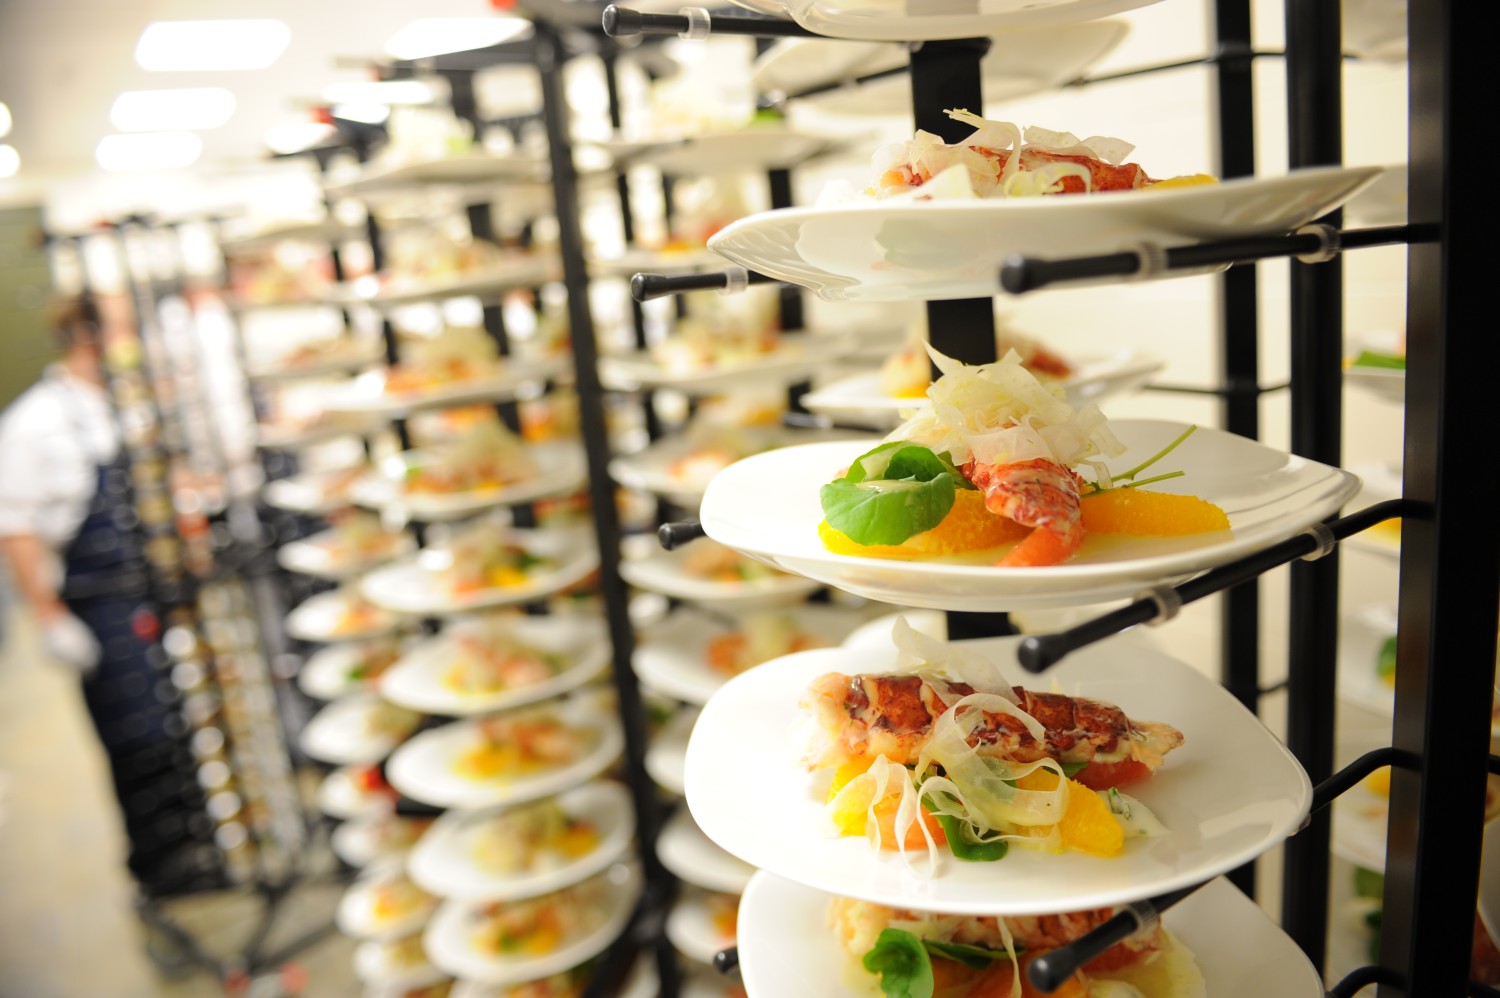 Amway Grand_Food Racks_Banquets_Catering_Plates on Rack_Food on Plates